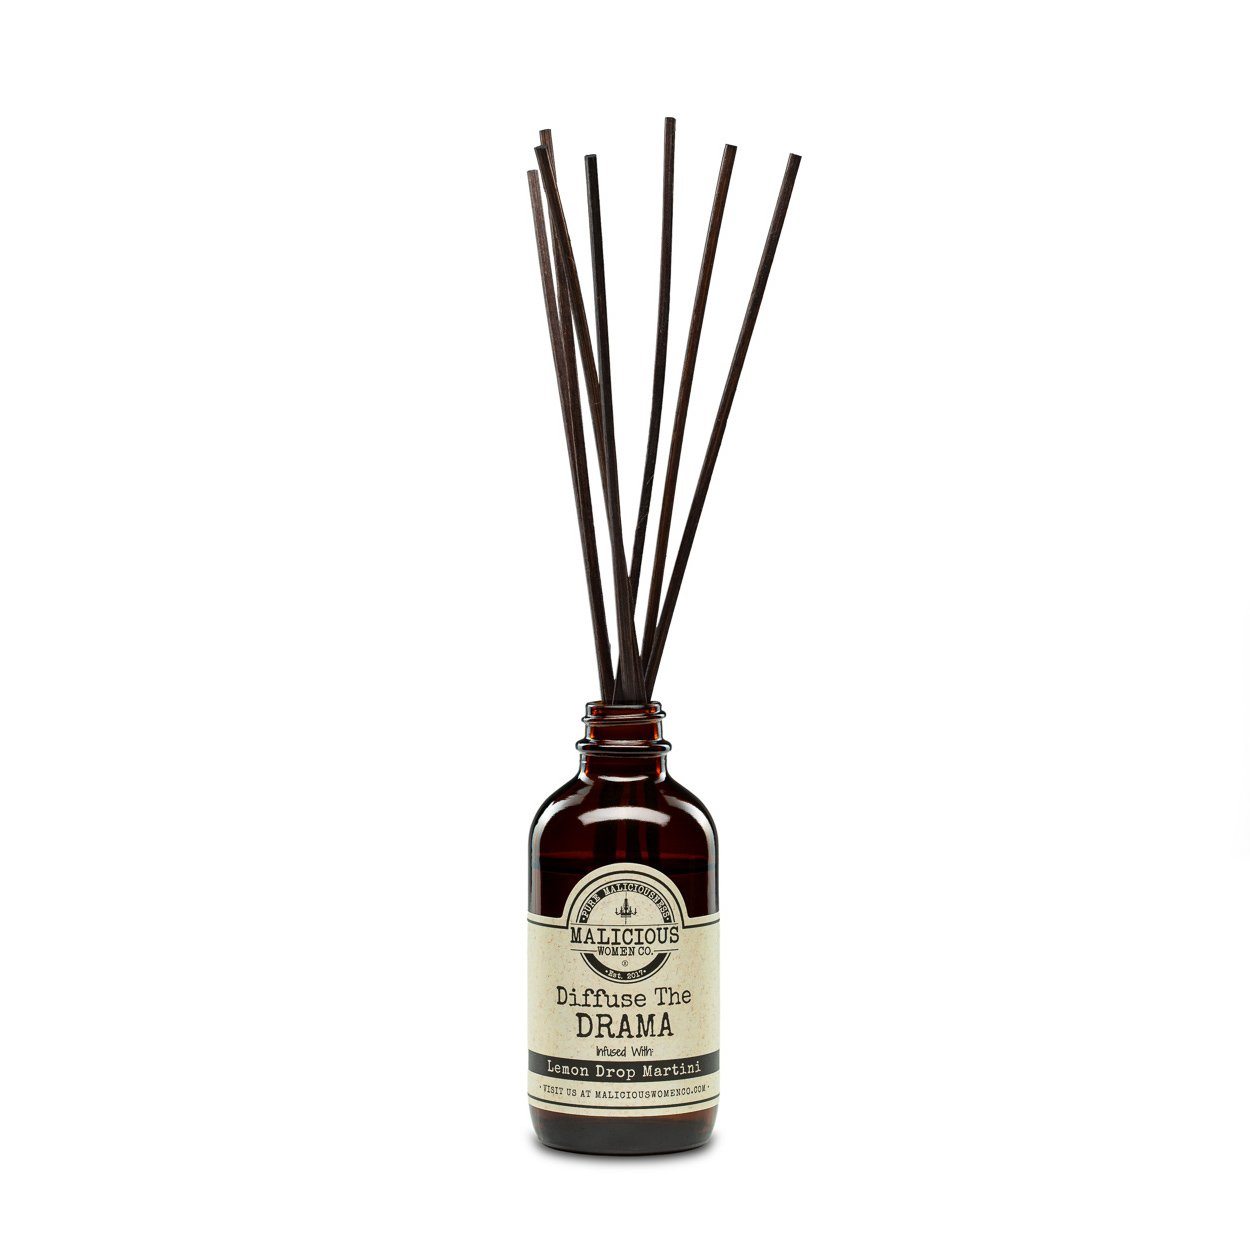 Diffuse It! 4 oz Reed Diffuser -Gift Boxed Reed Diffuser Malicious Women Co. 